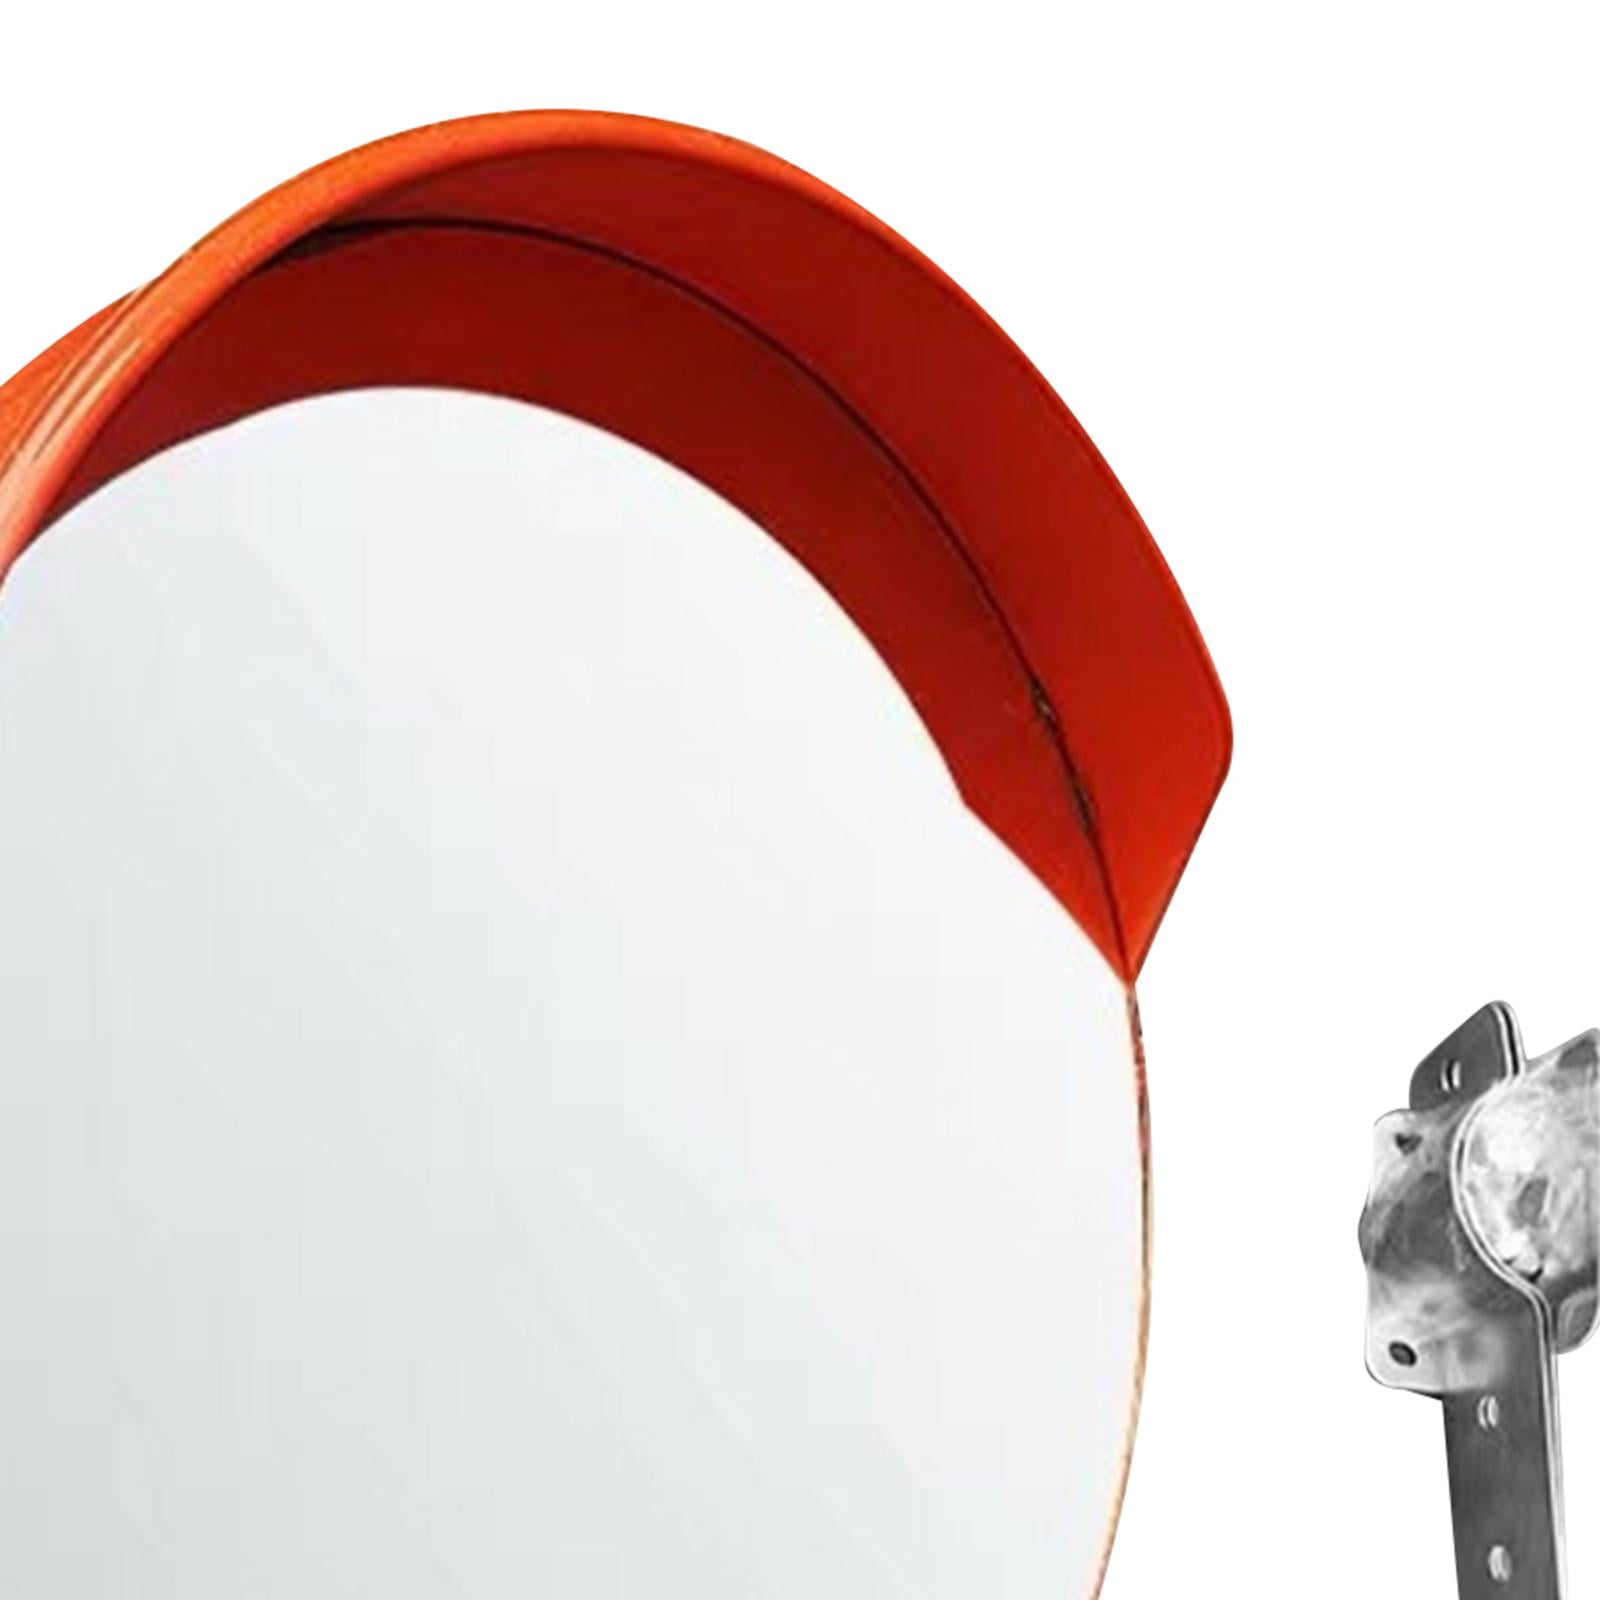 SNS SAFETY LTD Convex Flexible Traffic Mirror, Diameter 45cm (18), for  Road Safety and Shop Security with Adjustable Fixing Bracket for Pole 48 mm  : Buy Online at Best Price in KSA 